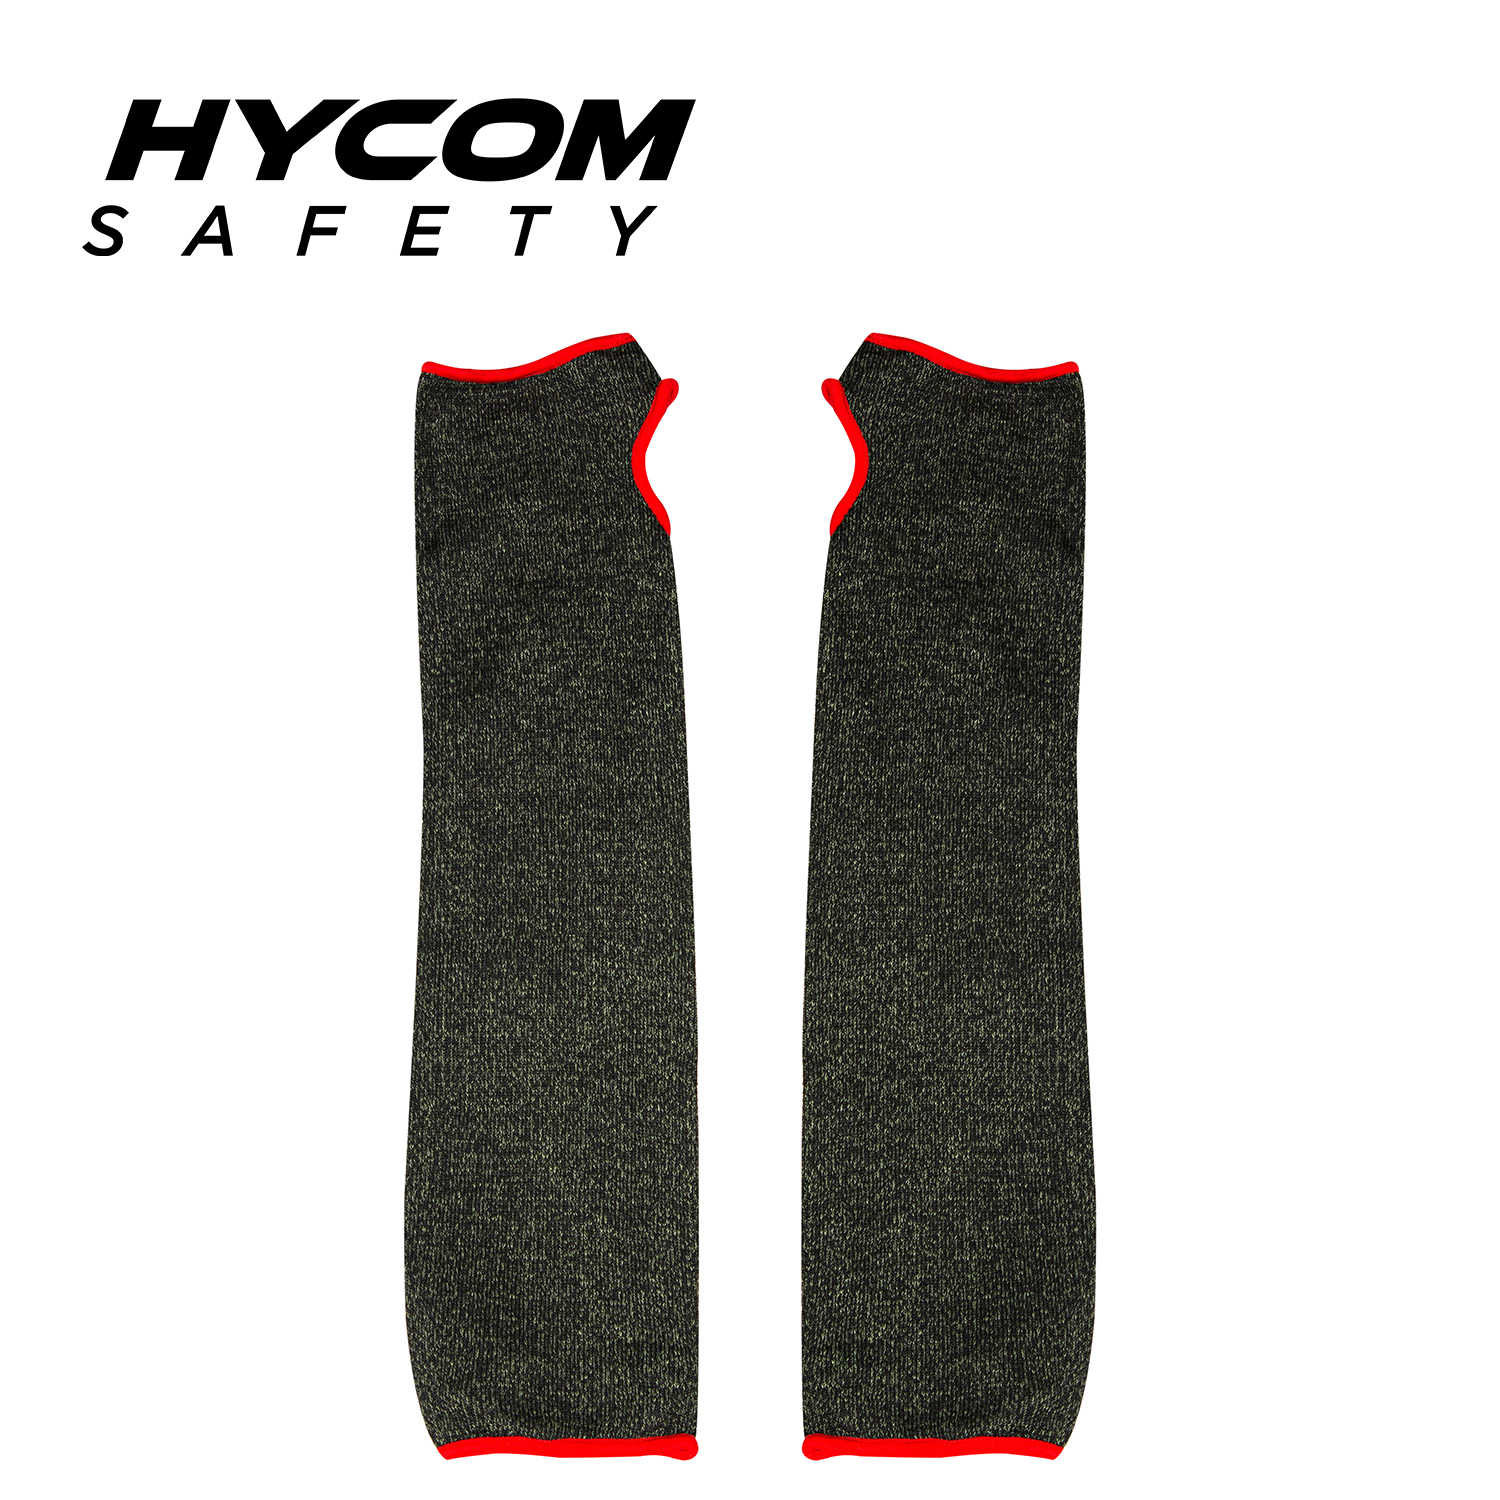 HYCOM ANSI 6 HPPE Anti Cut Sleeve with Thumb Slot Arm Protective for Industry